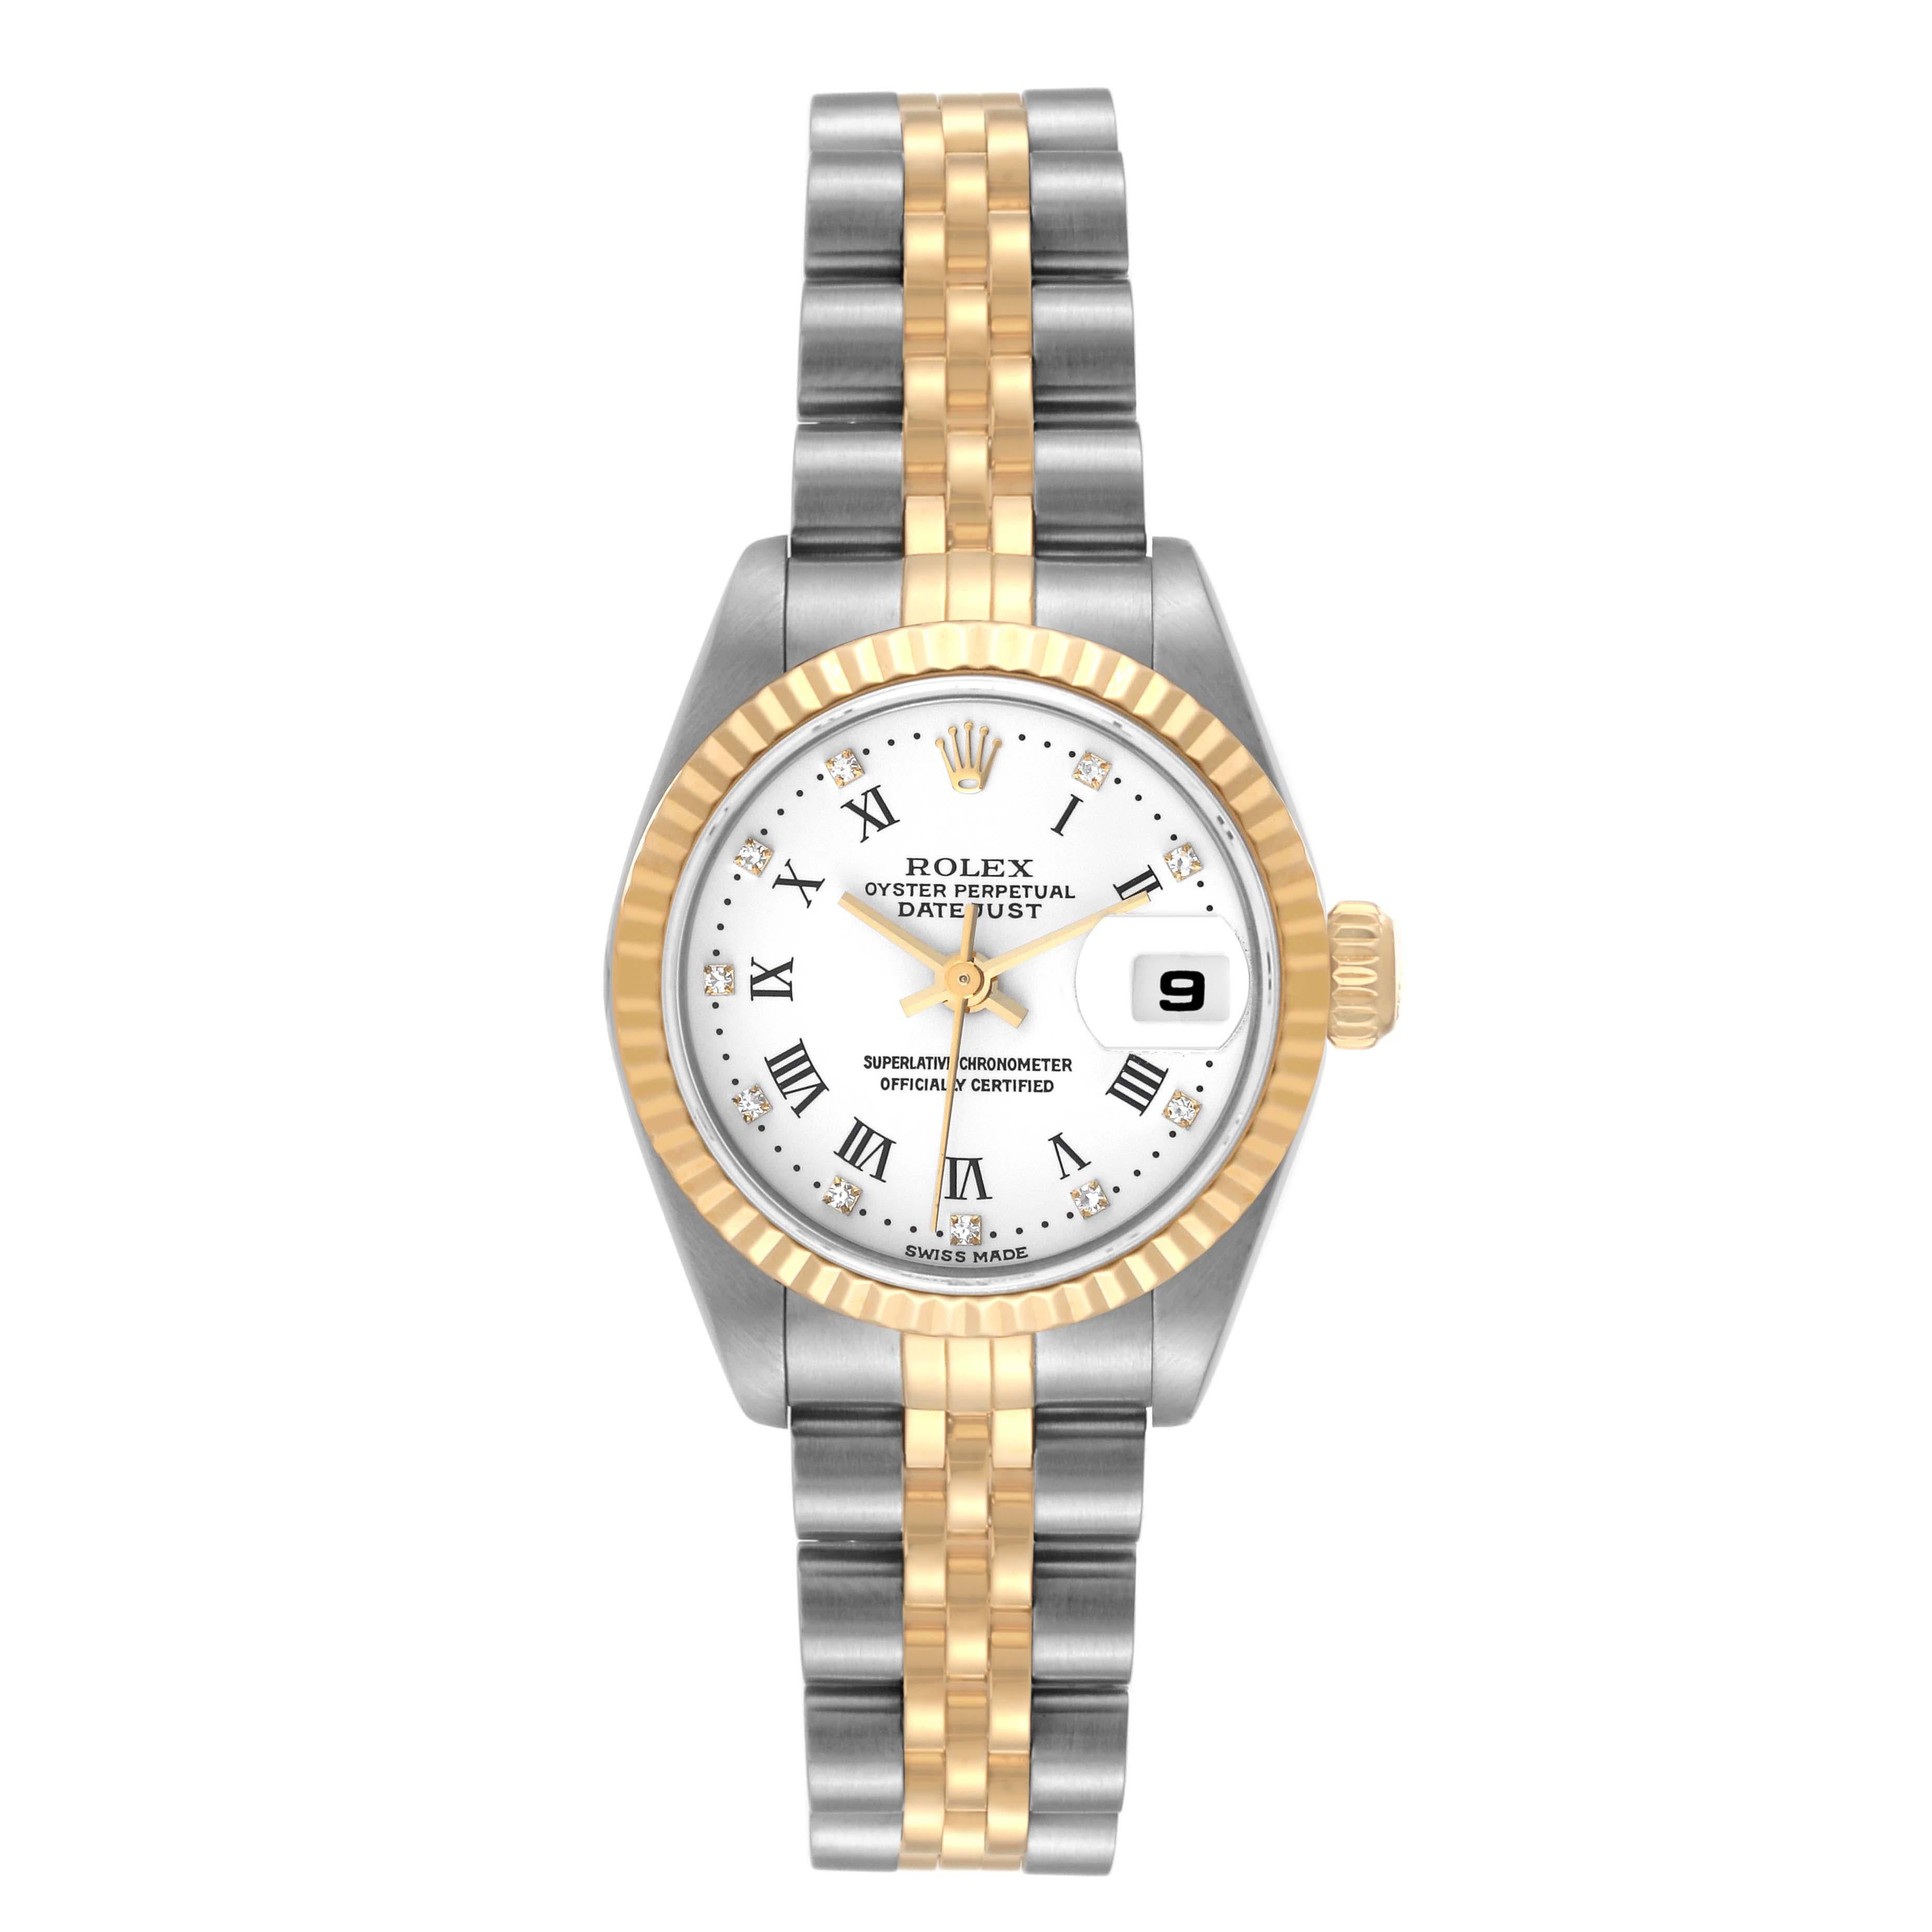 Rolex Datejust Yellow Gold White Diamond Dial Ladies Watch 79173. Officially certified chronometer self-winding movement with quickset date function. Stainless steel oyster case 26.0 mm in diameter. Rolex logo on an 18K yellow gold crown. 18k yellow